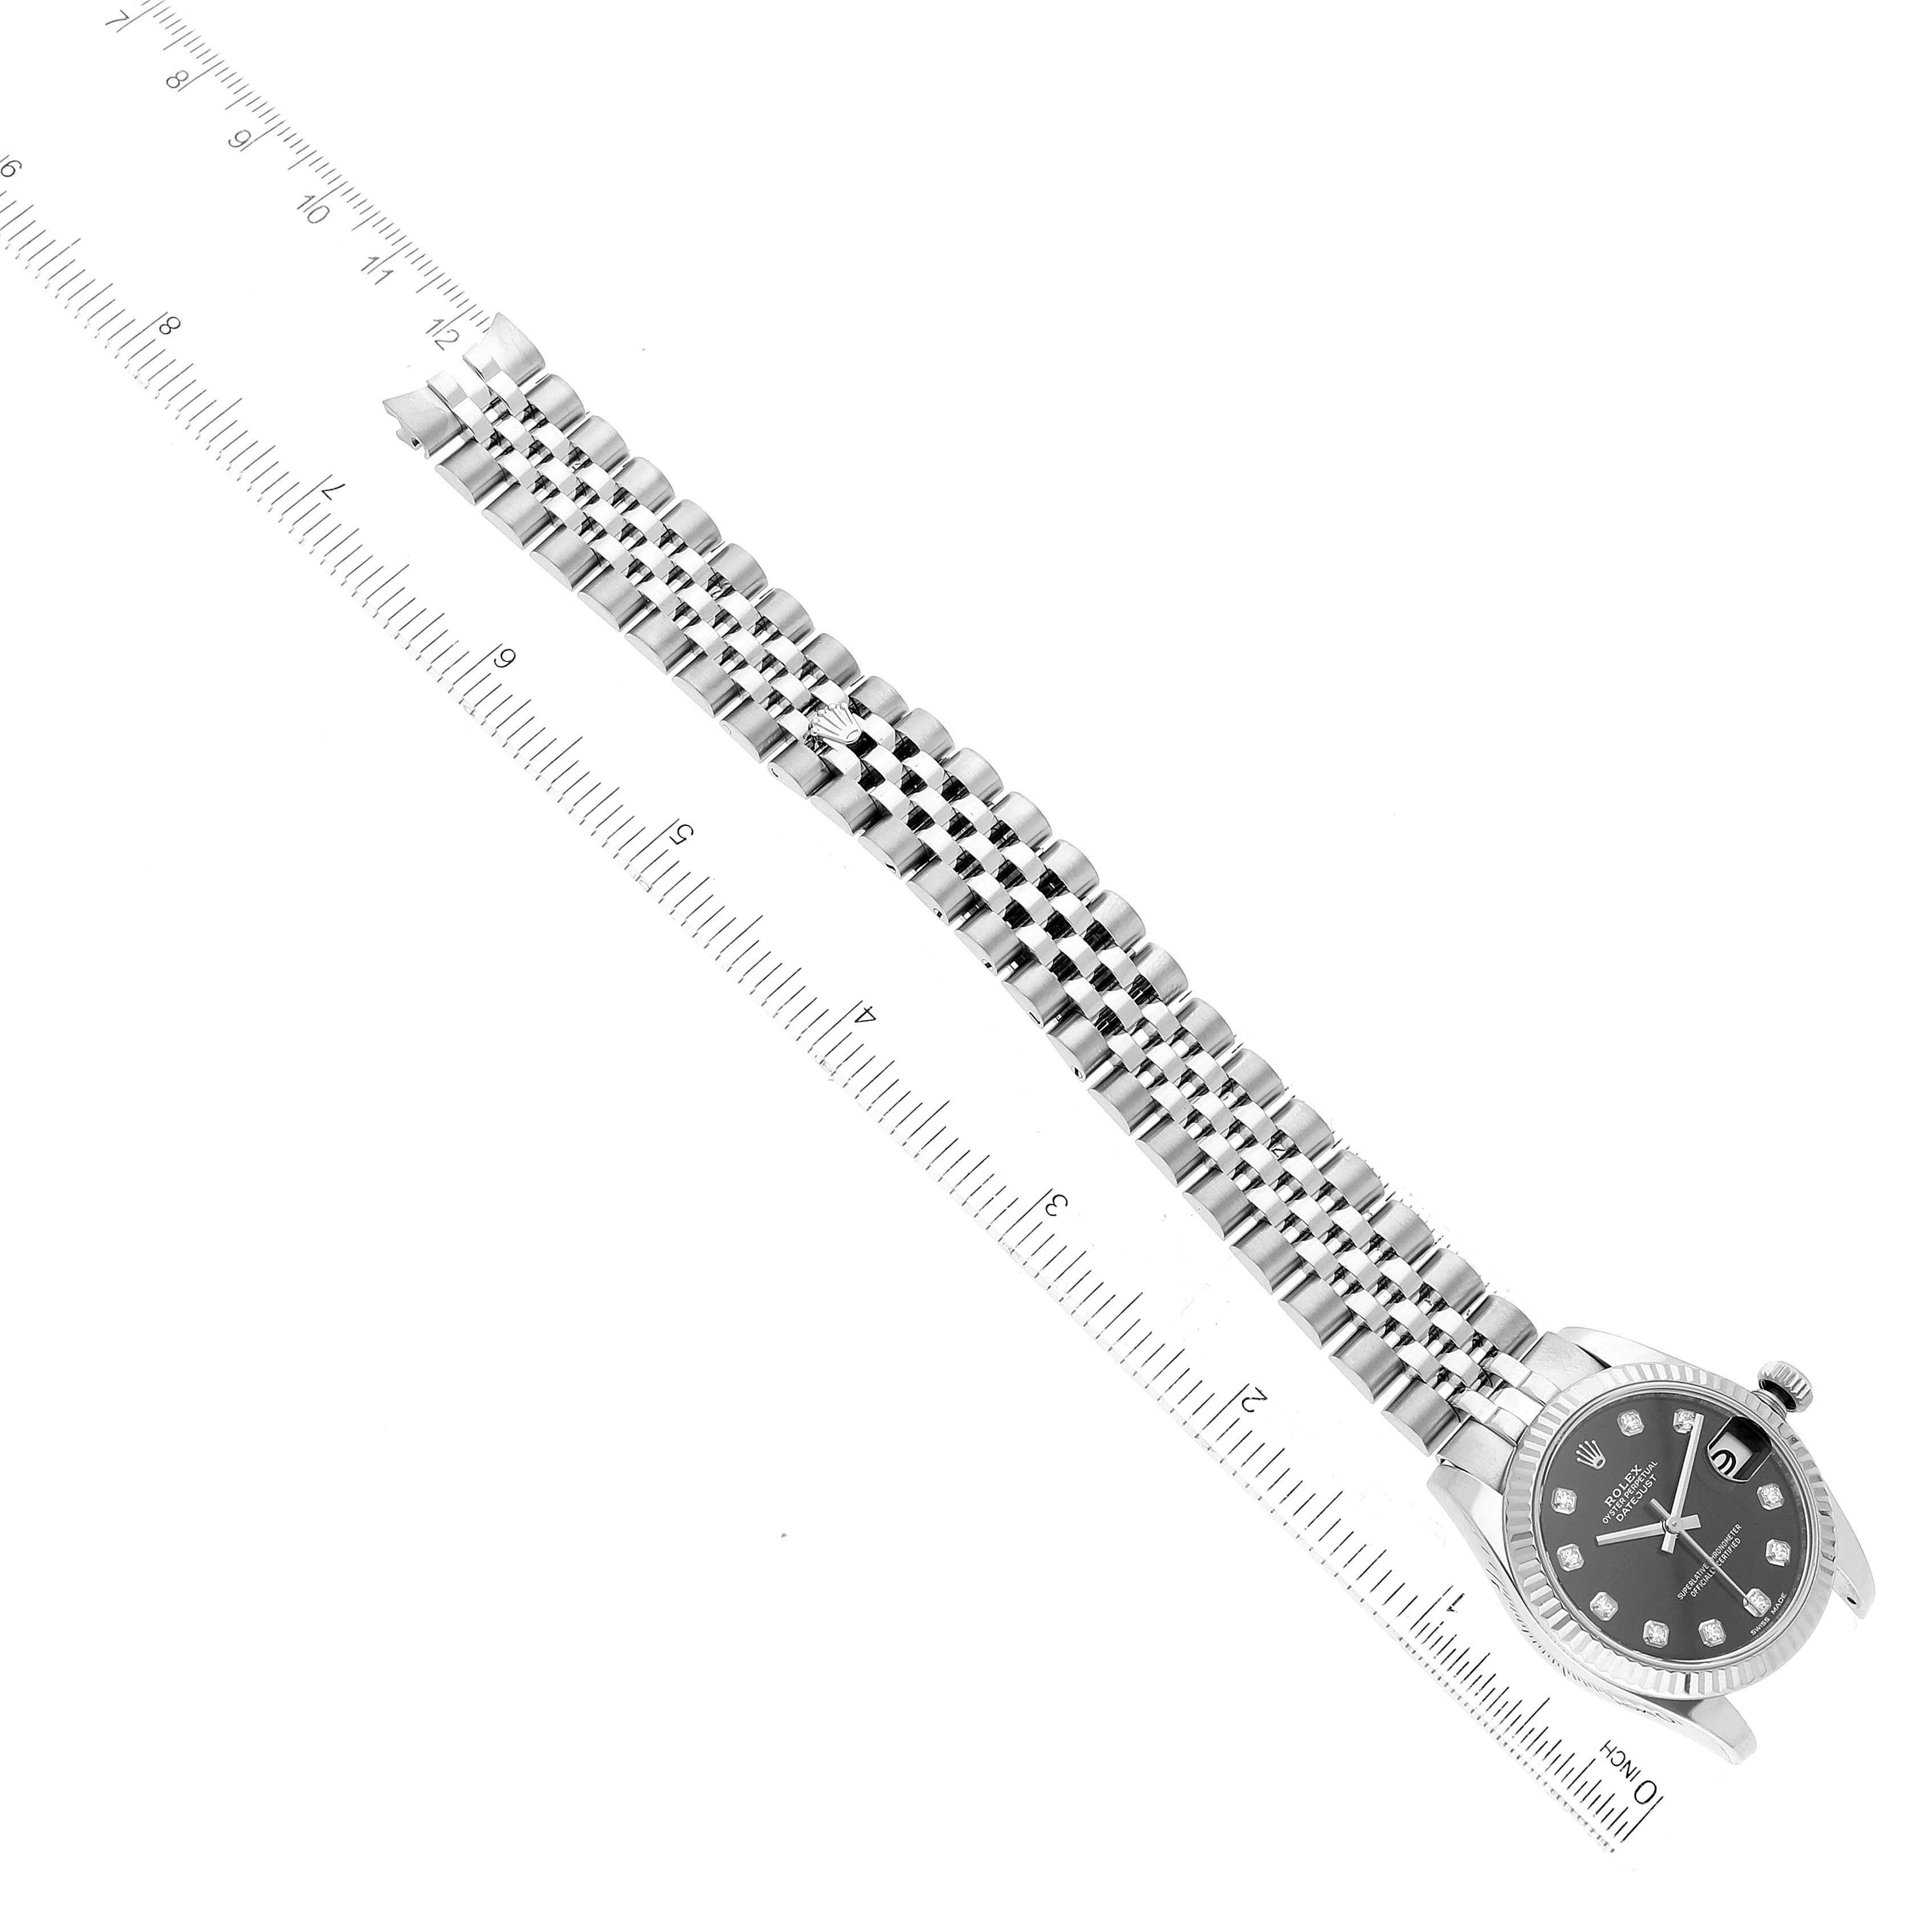 Rolex Datejust Midsize Steel White Gold Diamond Dial Ladies Watch 178274 For Sale 8